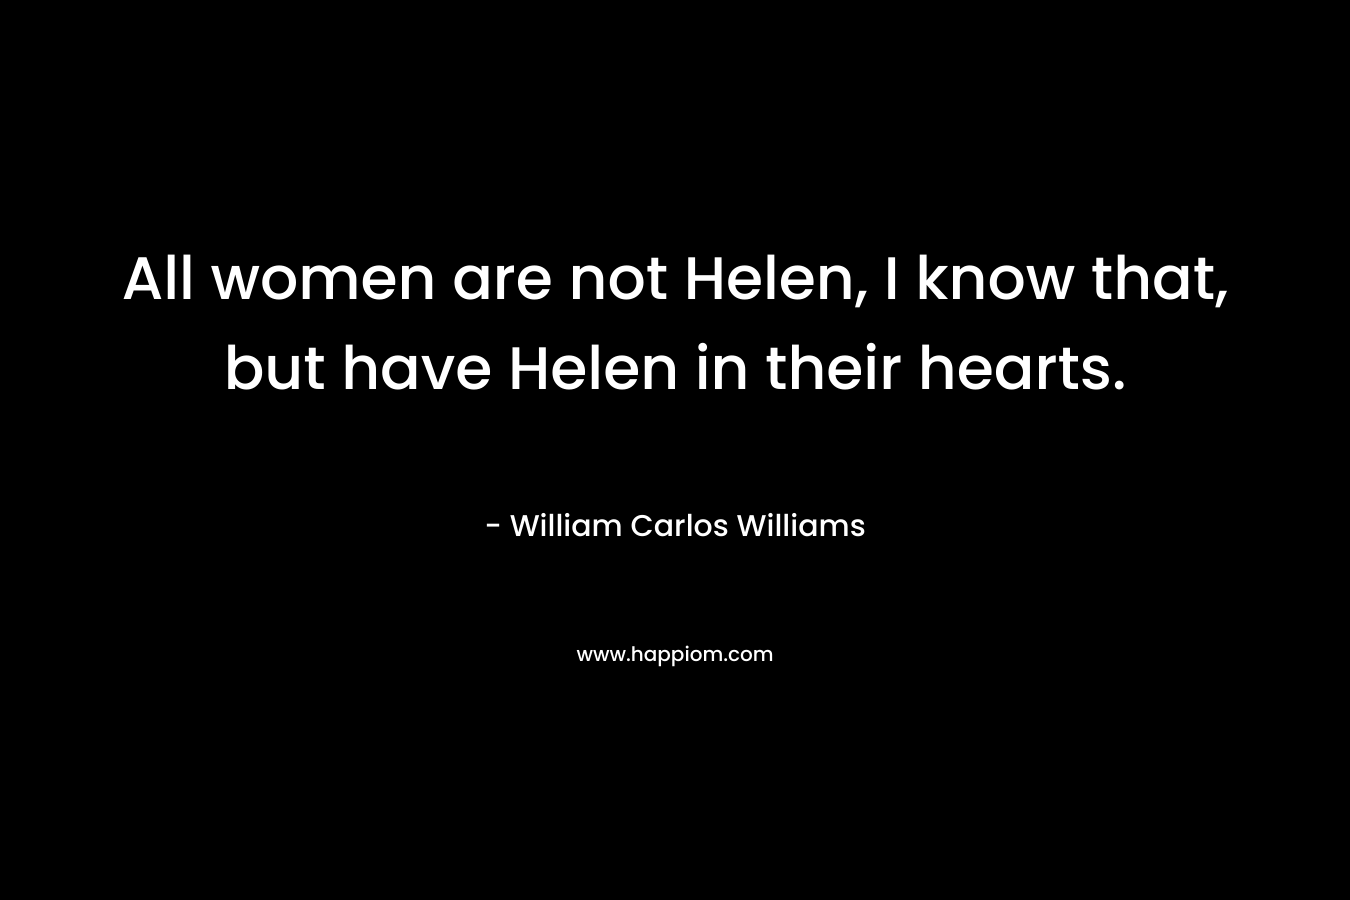 All women are not Helen, I know that, but have Helen in their hearts. – William Carlos Williams